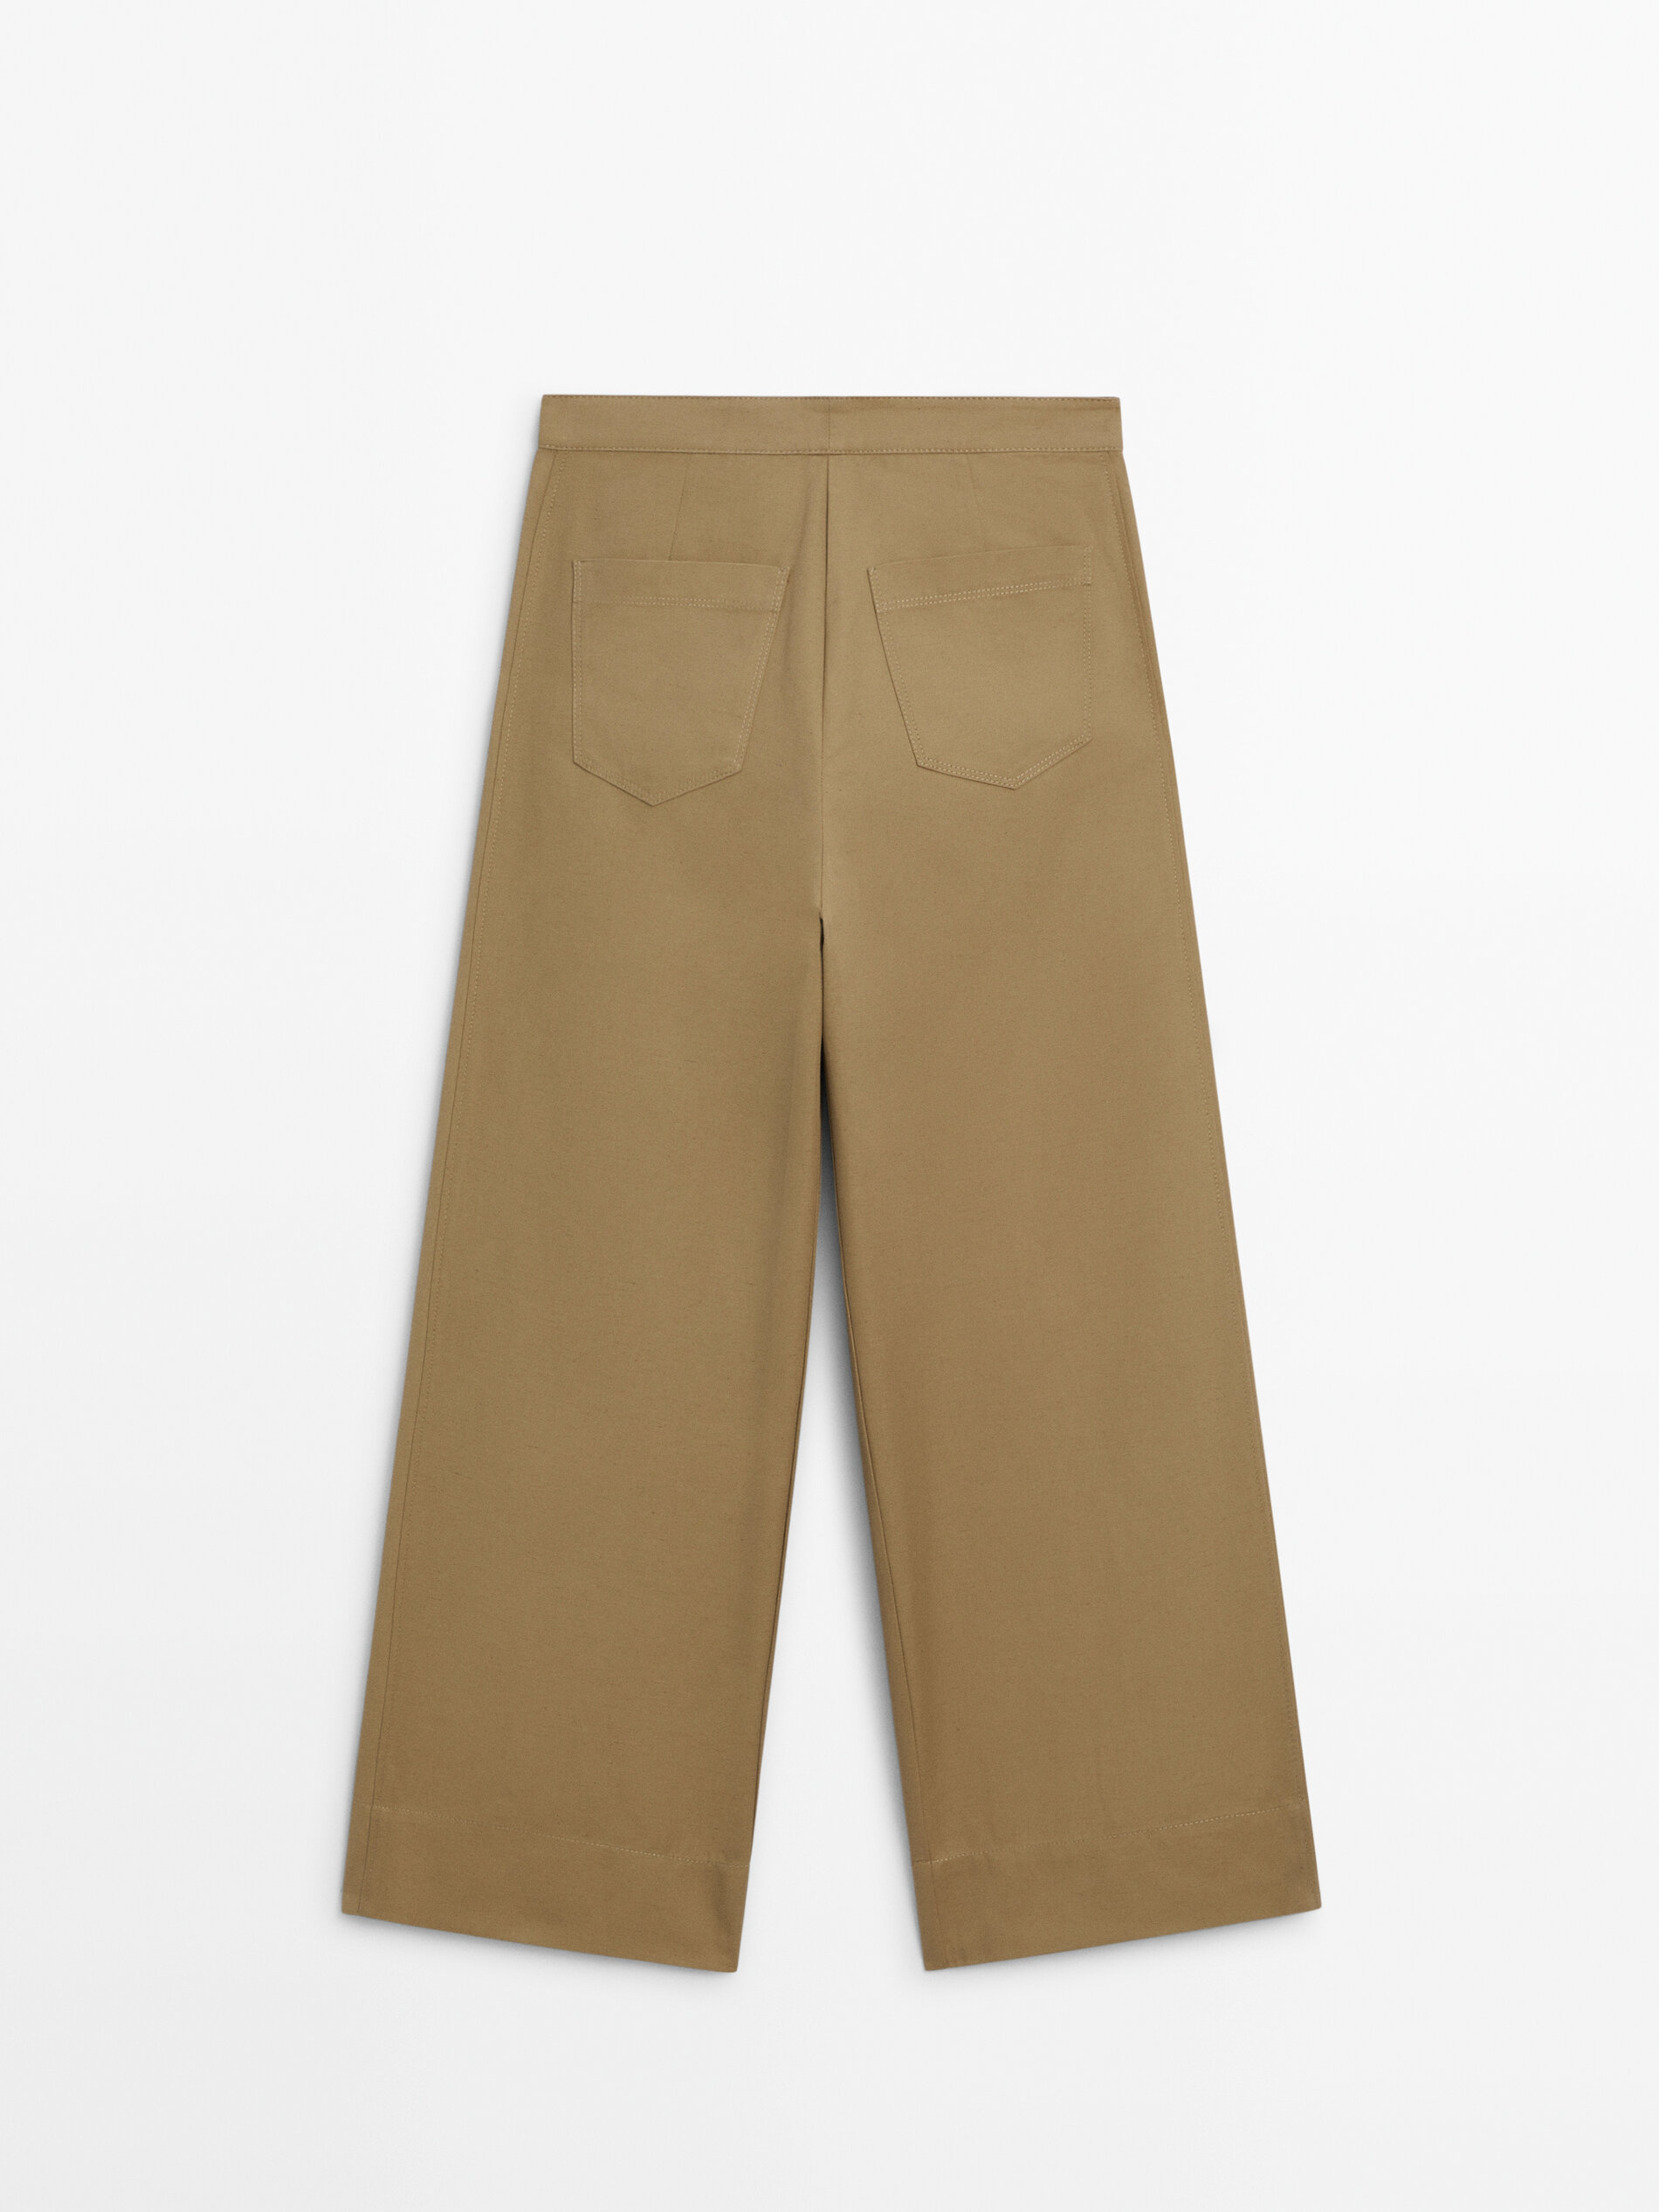 High-waist wide-leg trousers with double dart detail